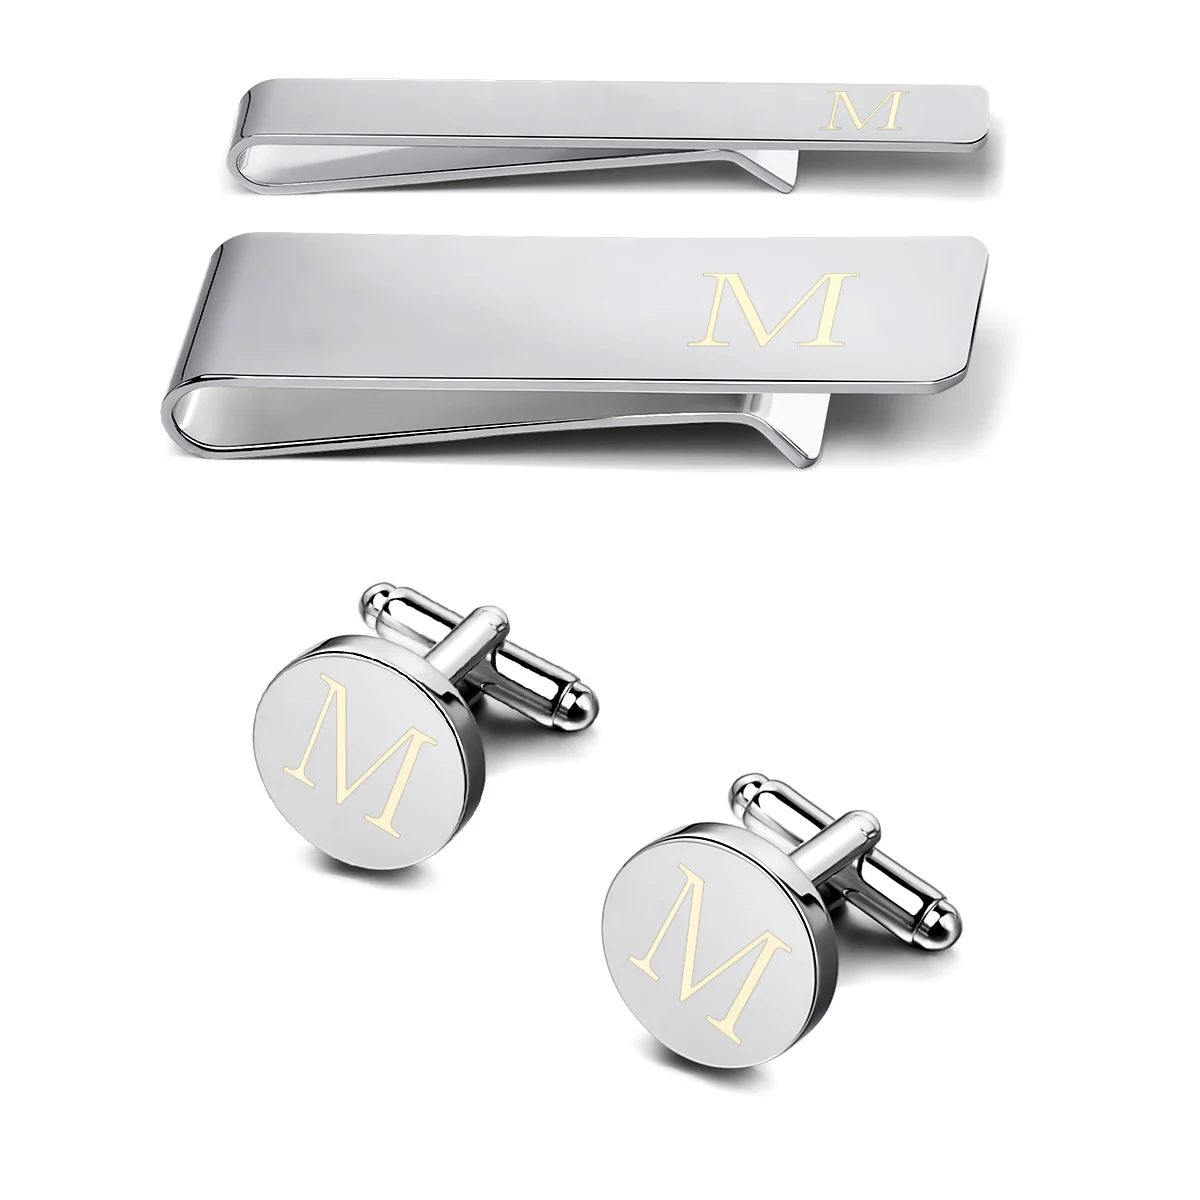 

Hot Selling Engraved Cuff Links Cuff Links or Tie Clips Type and Men's Gender Cufflinks, Engraved pattern